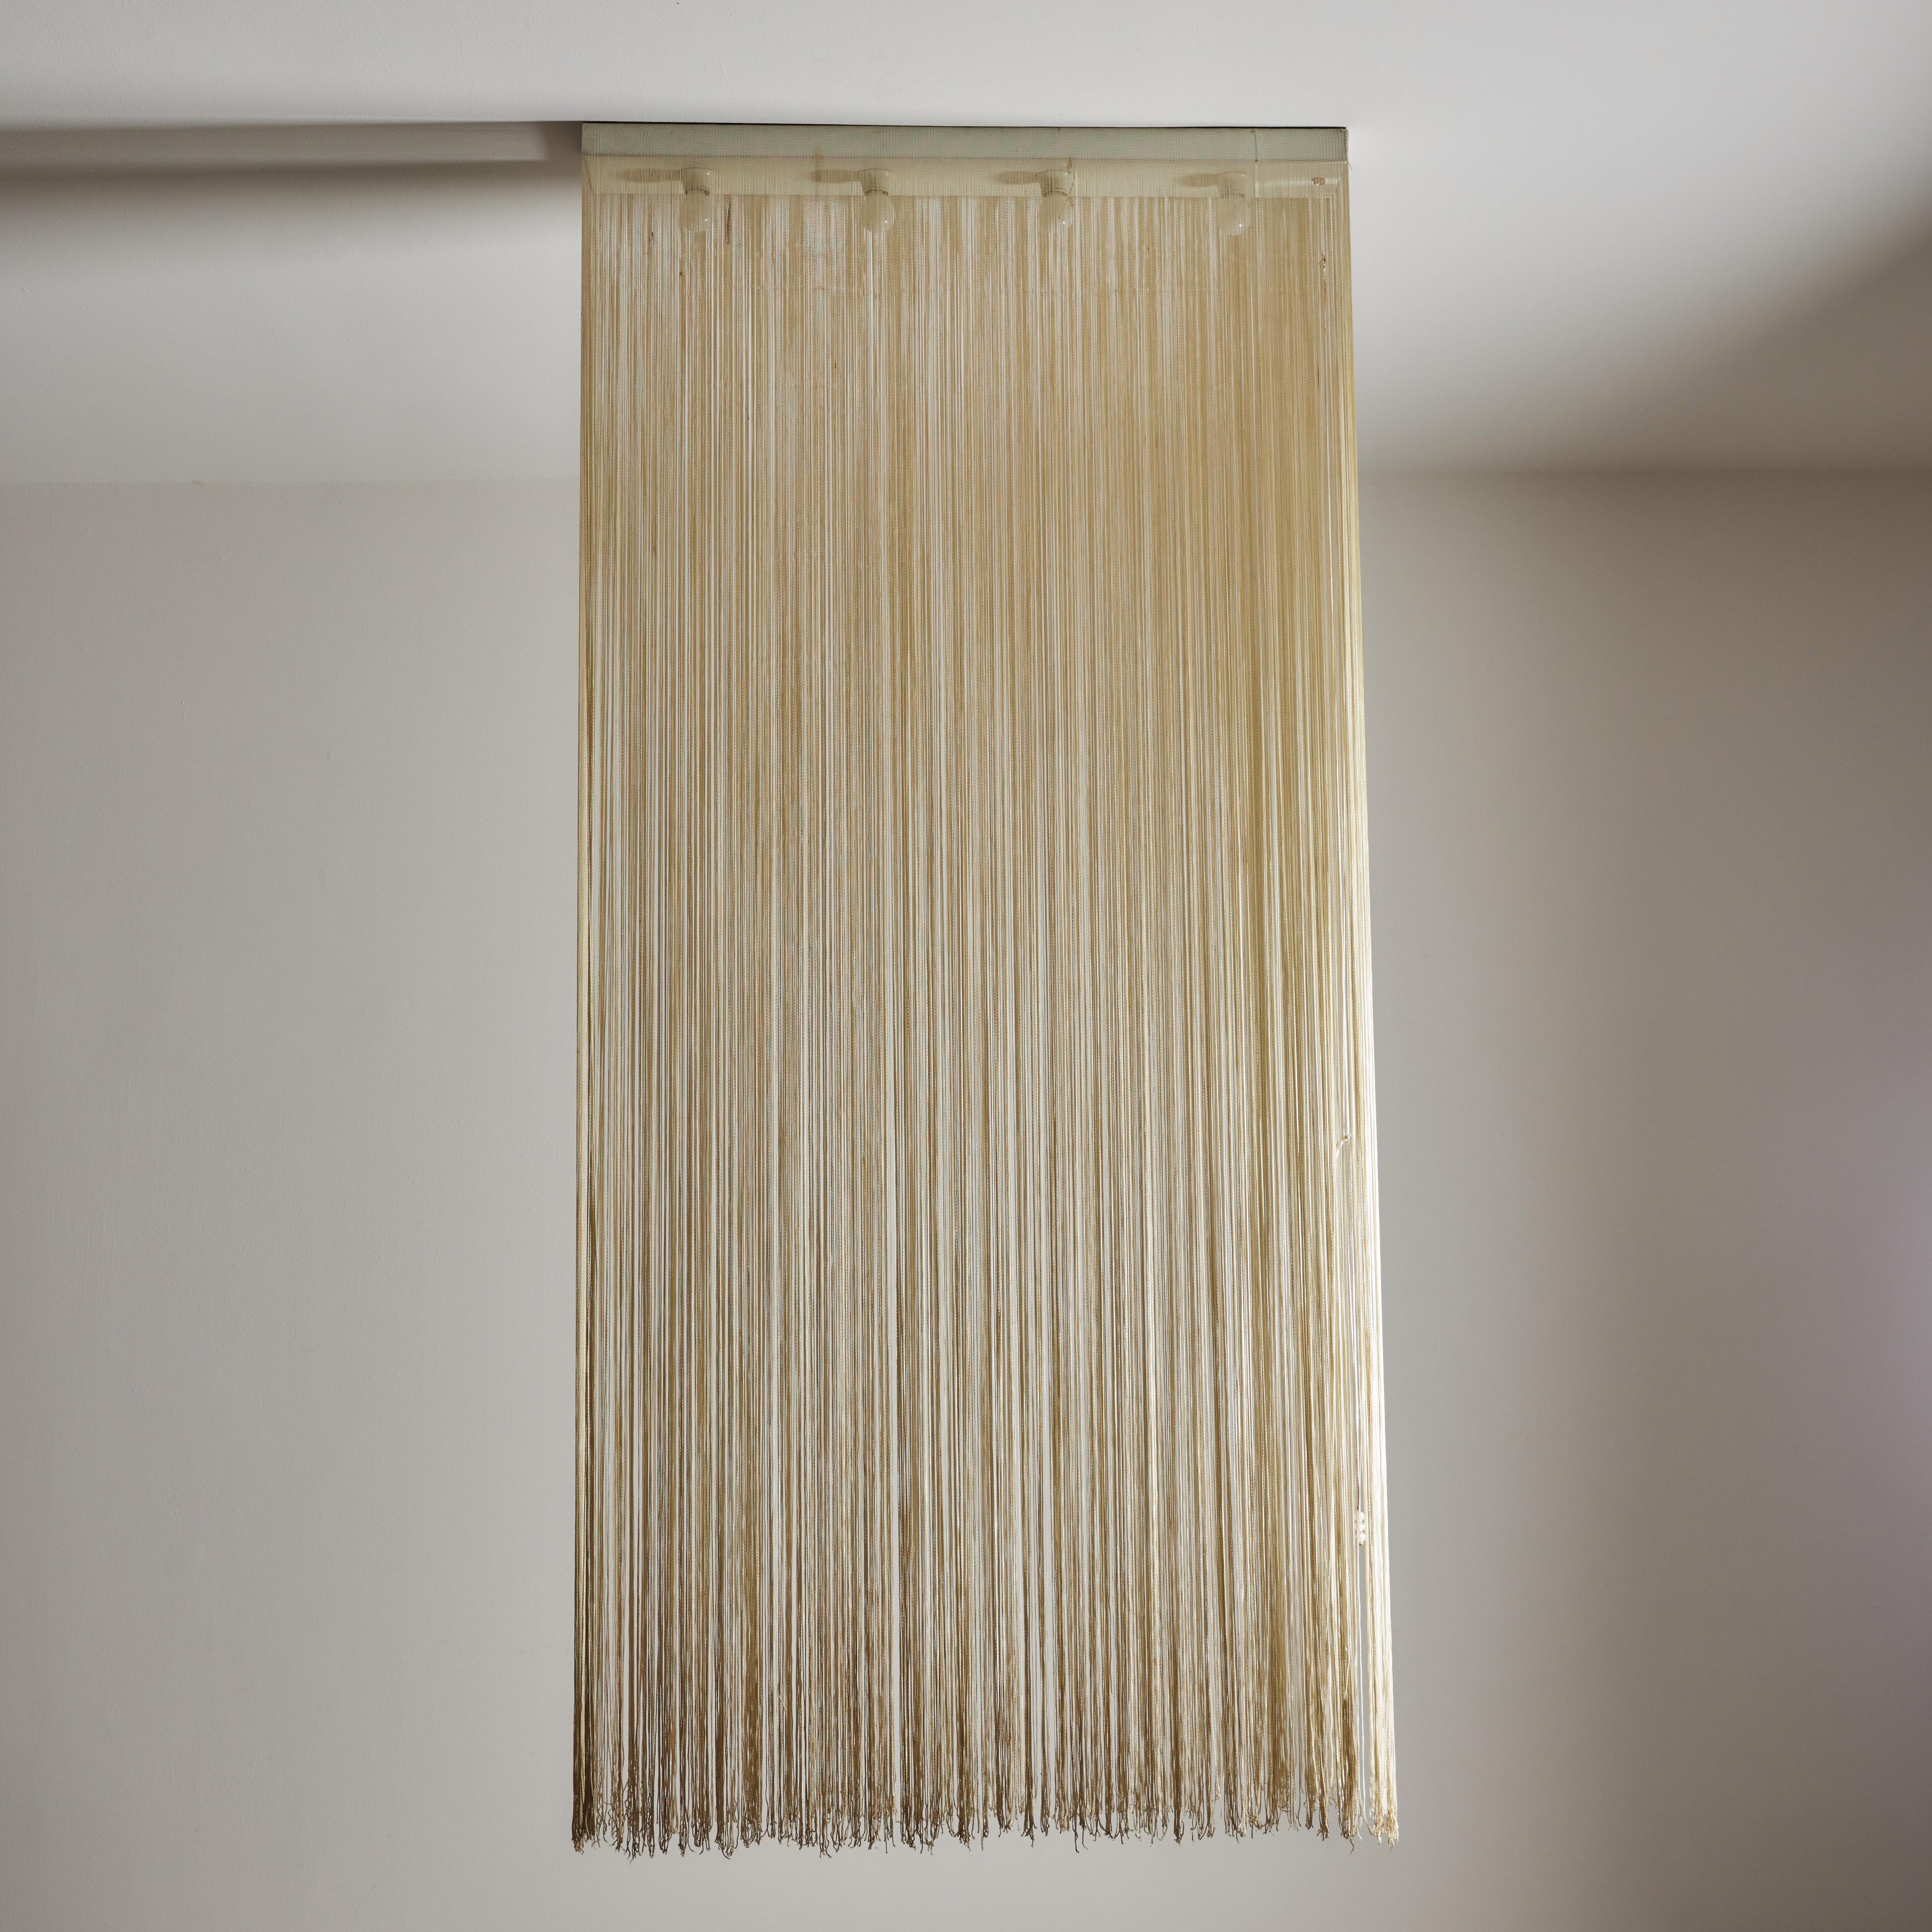 Garbo Ceiling Light by Mario Yagi & Studio Simon for Sirrah In Good Condition For Sale In Los Angeles, CA